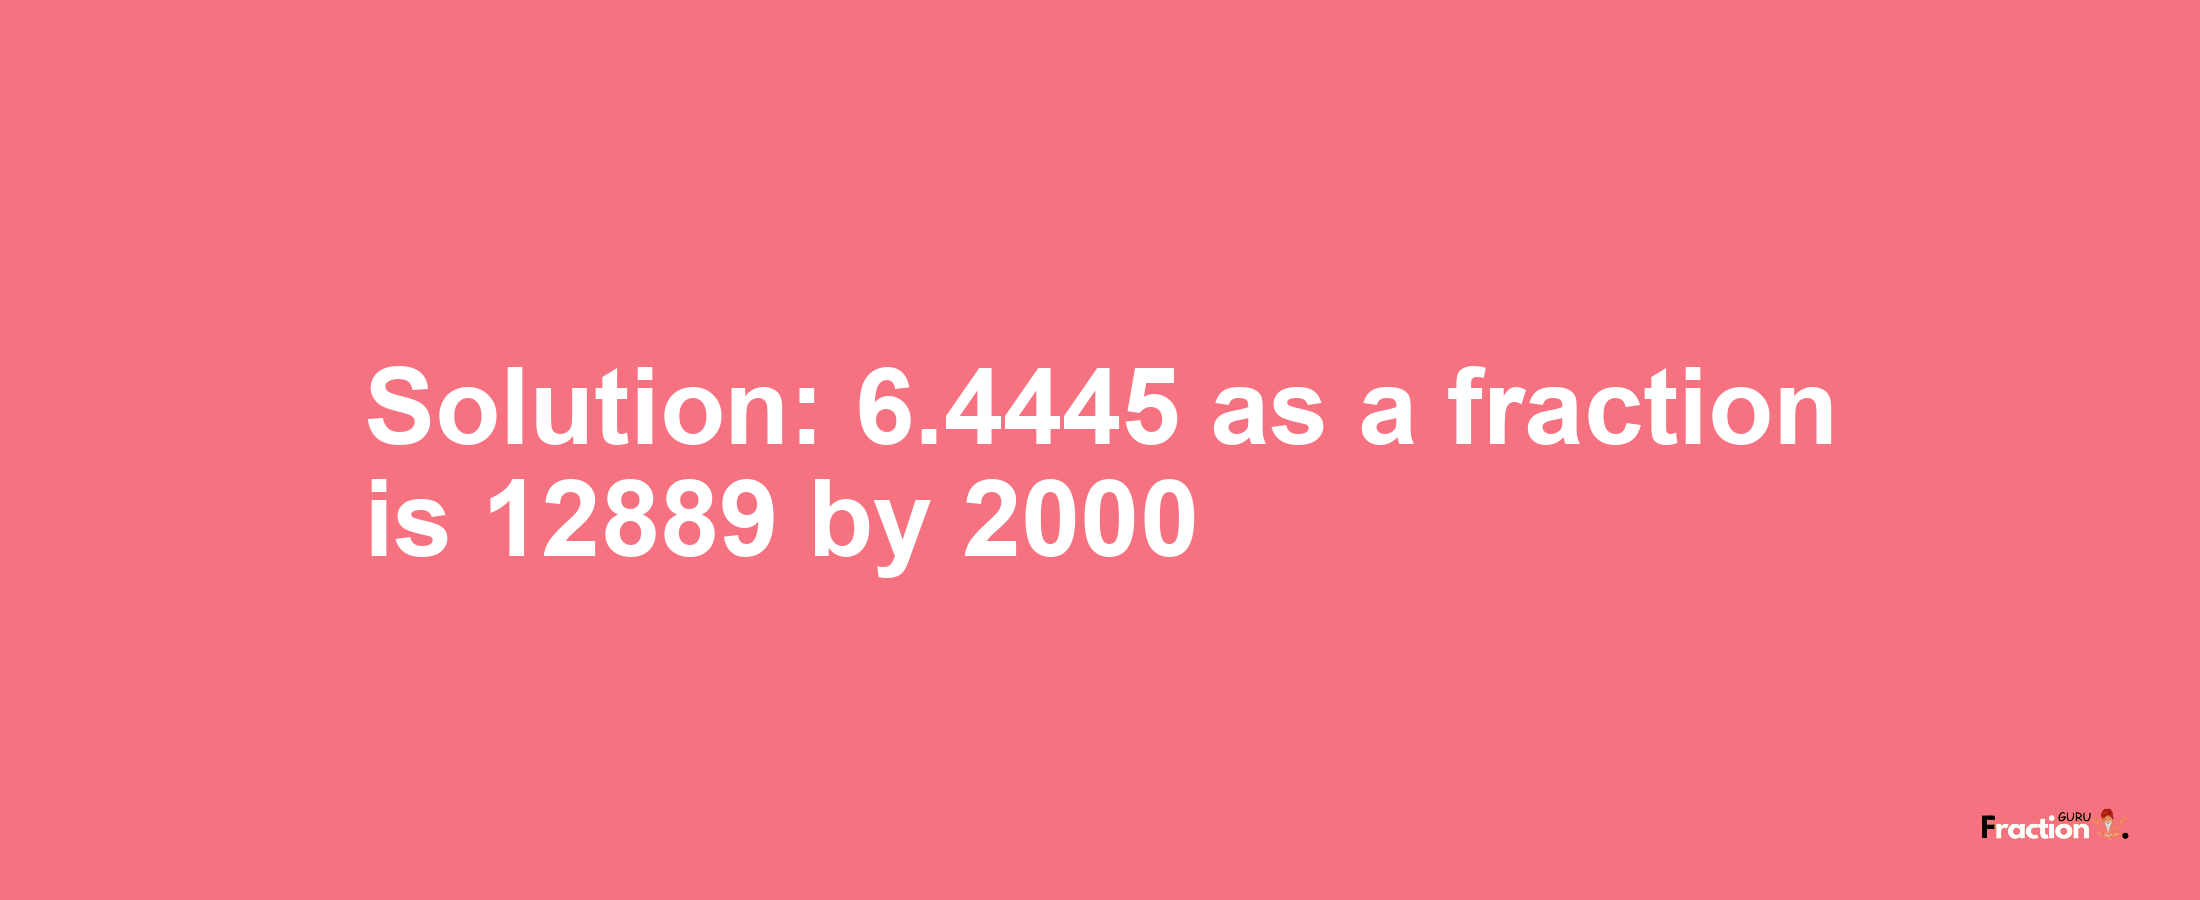 Solution:6.4445 as a fraction is 12889/2000